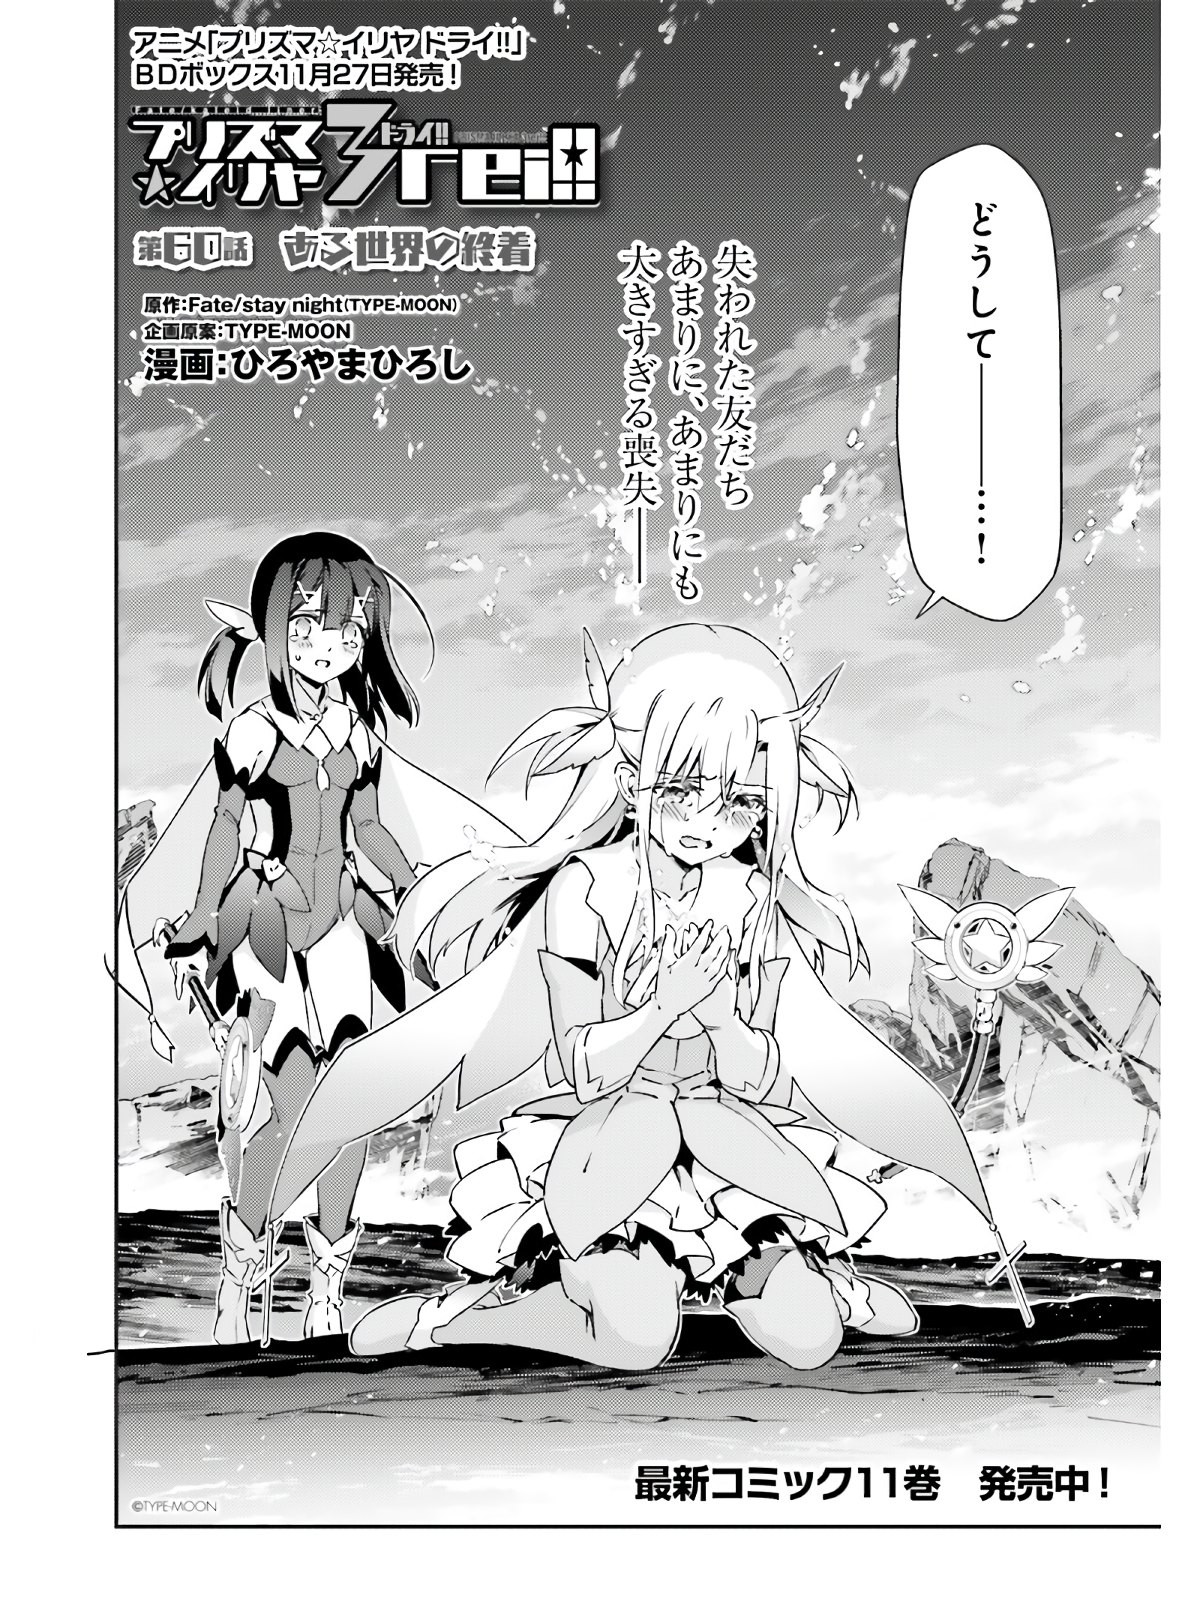 Fate/Kaleid Liner Prisma Illya Drei! - Chapter 60 - Page 2